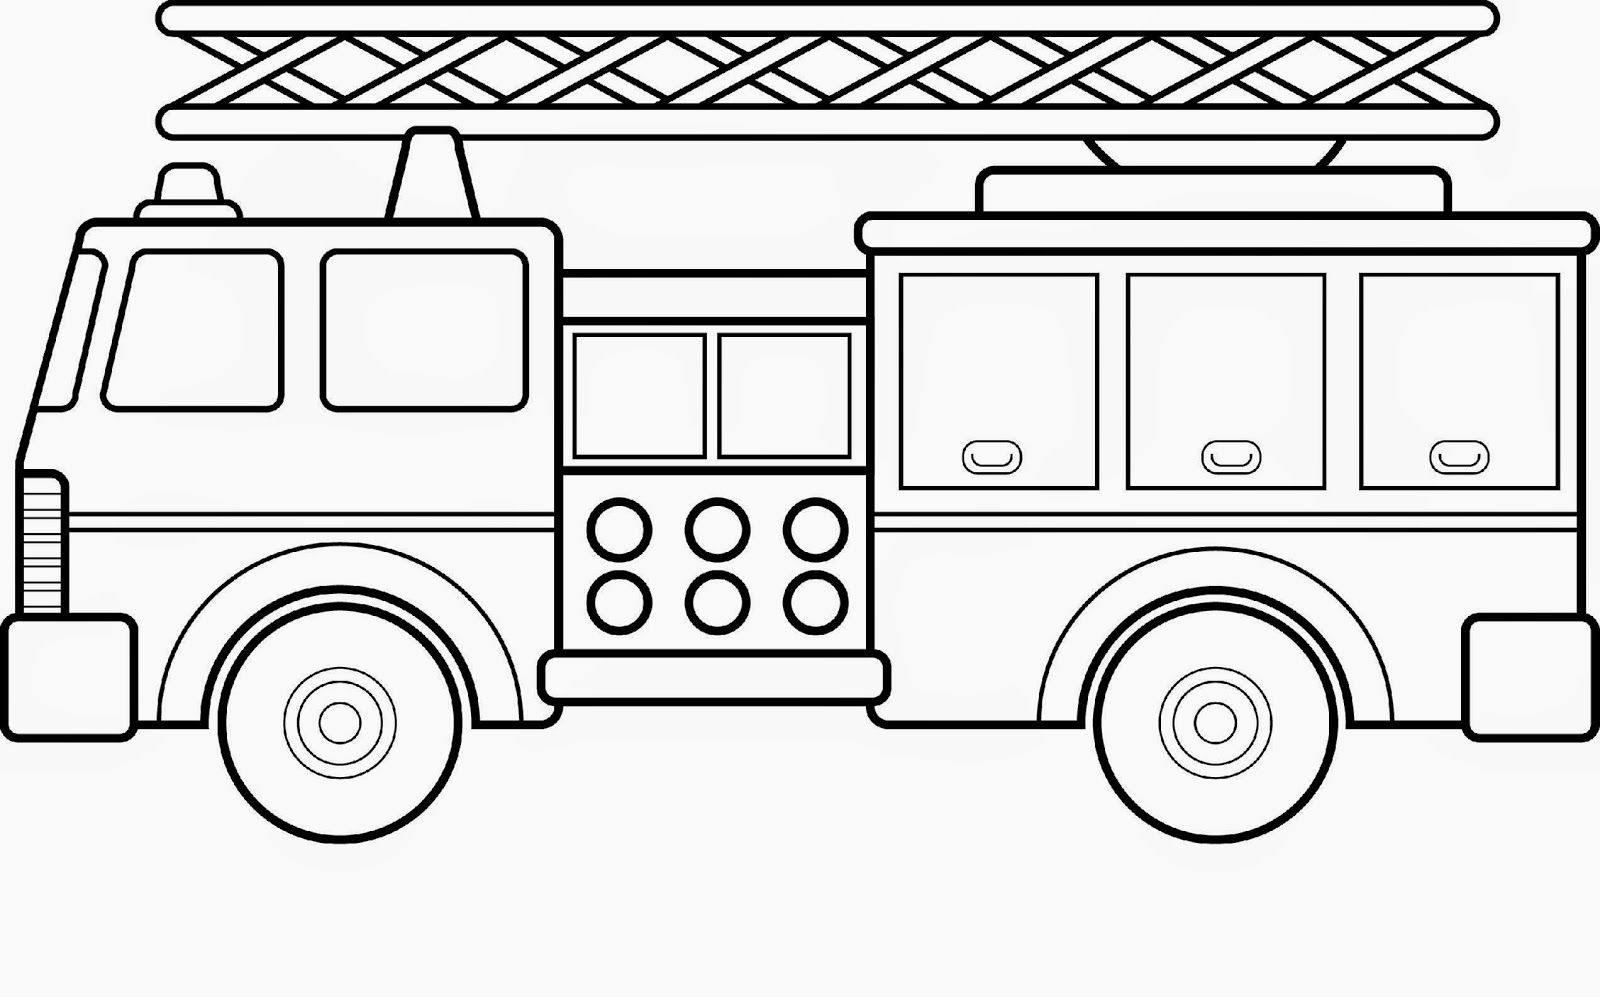 Download Free Printable Fire Truck Coloring Pages - Coloring Home